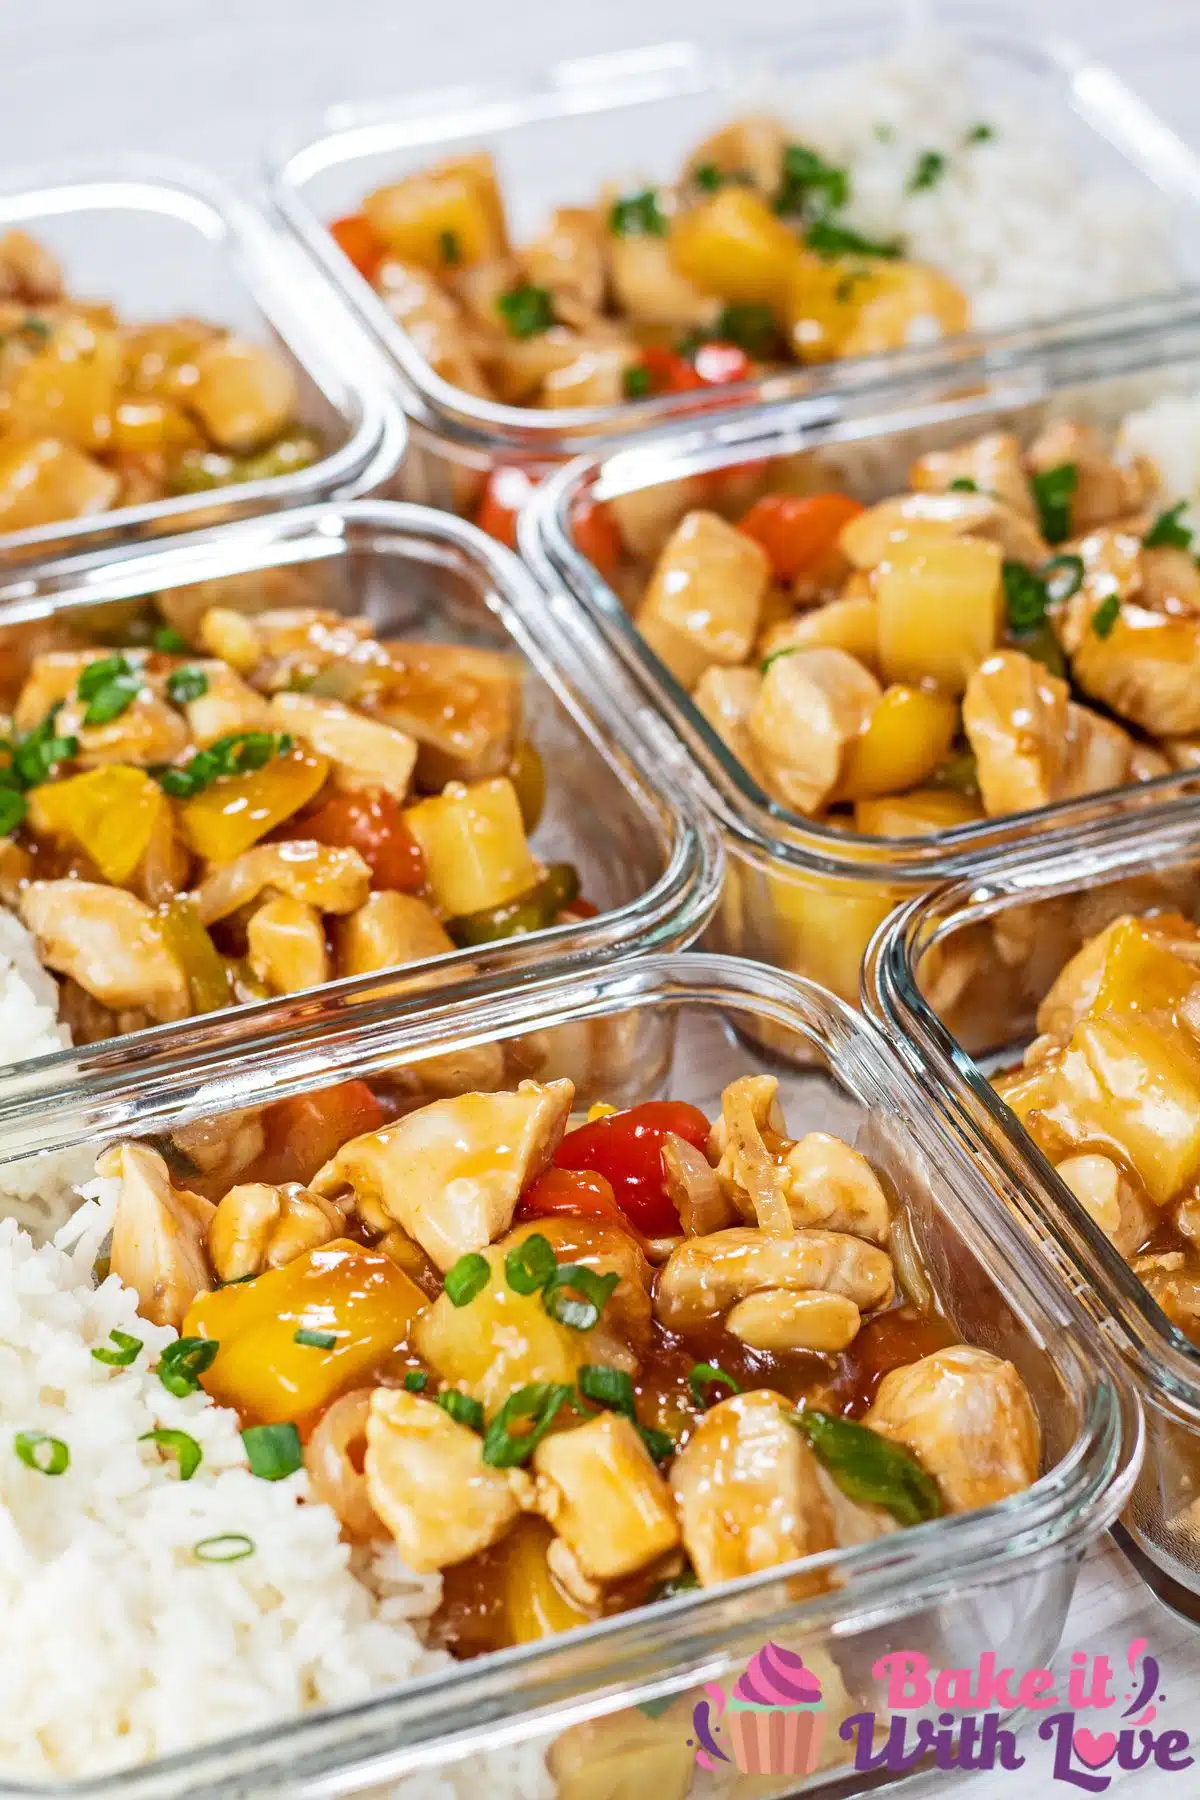 Best meal prep sweet and sour chicken recipe to make in advance for busy schedules.